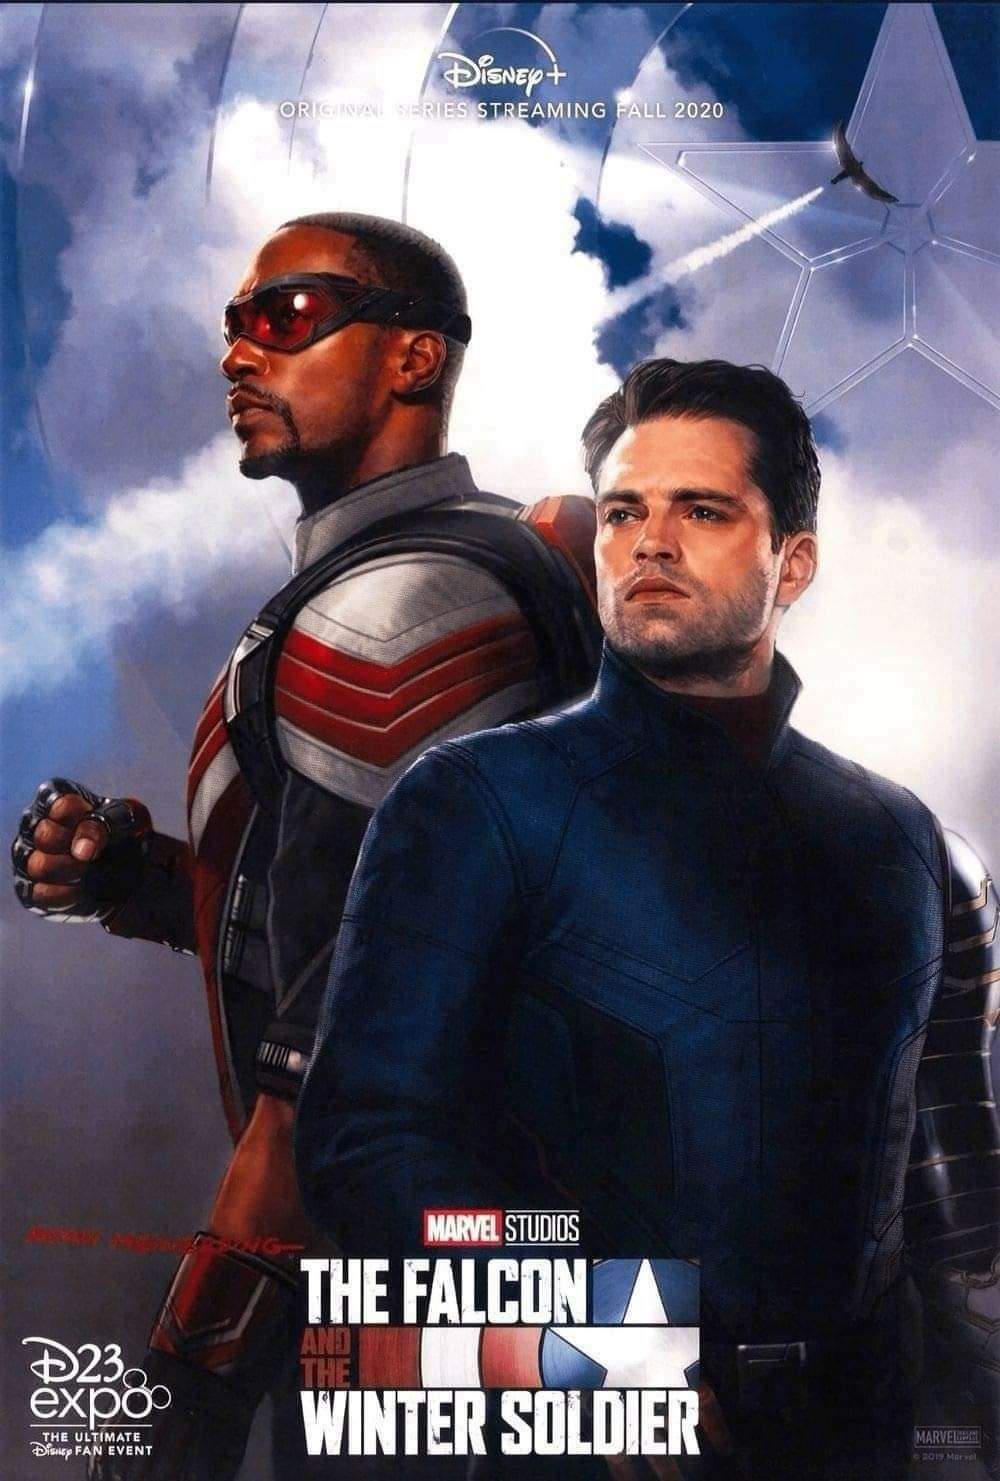 anticipated movies 2021 - falcon and the winter soldier - Disneyt Orical Series Streaming Fall 2020 Marvel Studios The Falcon P23 expo And The Winter Soldier The Ultimate Dinnep Fan Event Marvelux 30 Ma